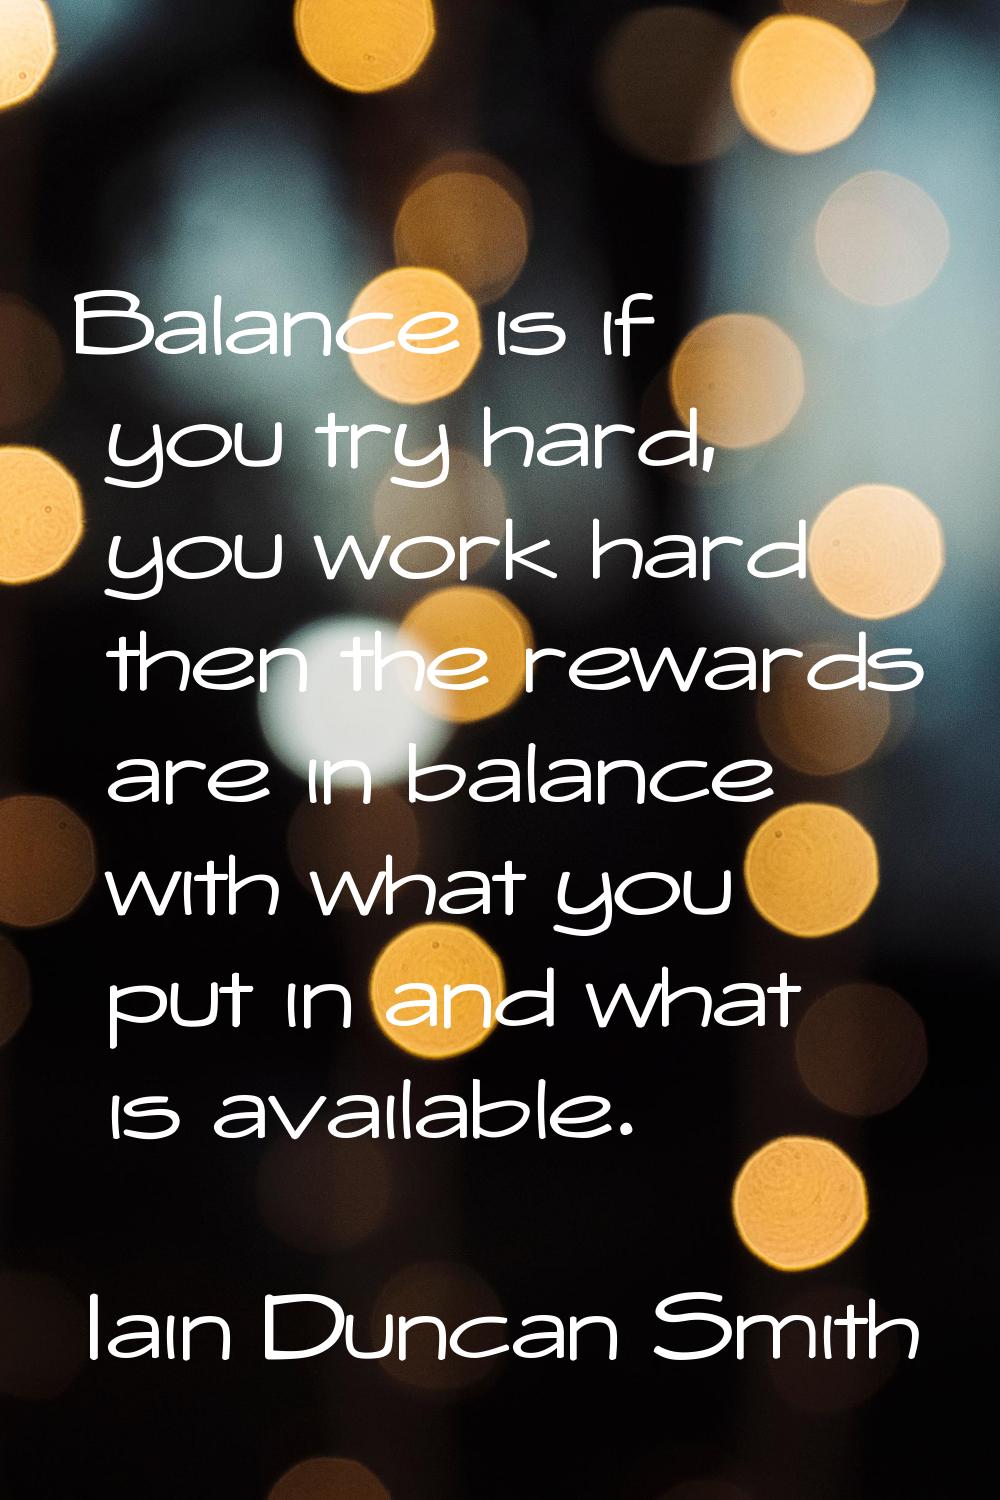 Balance is if you try hard, you work hard then the rewards are in balance with what you put in and 